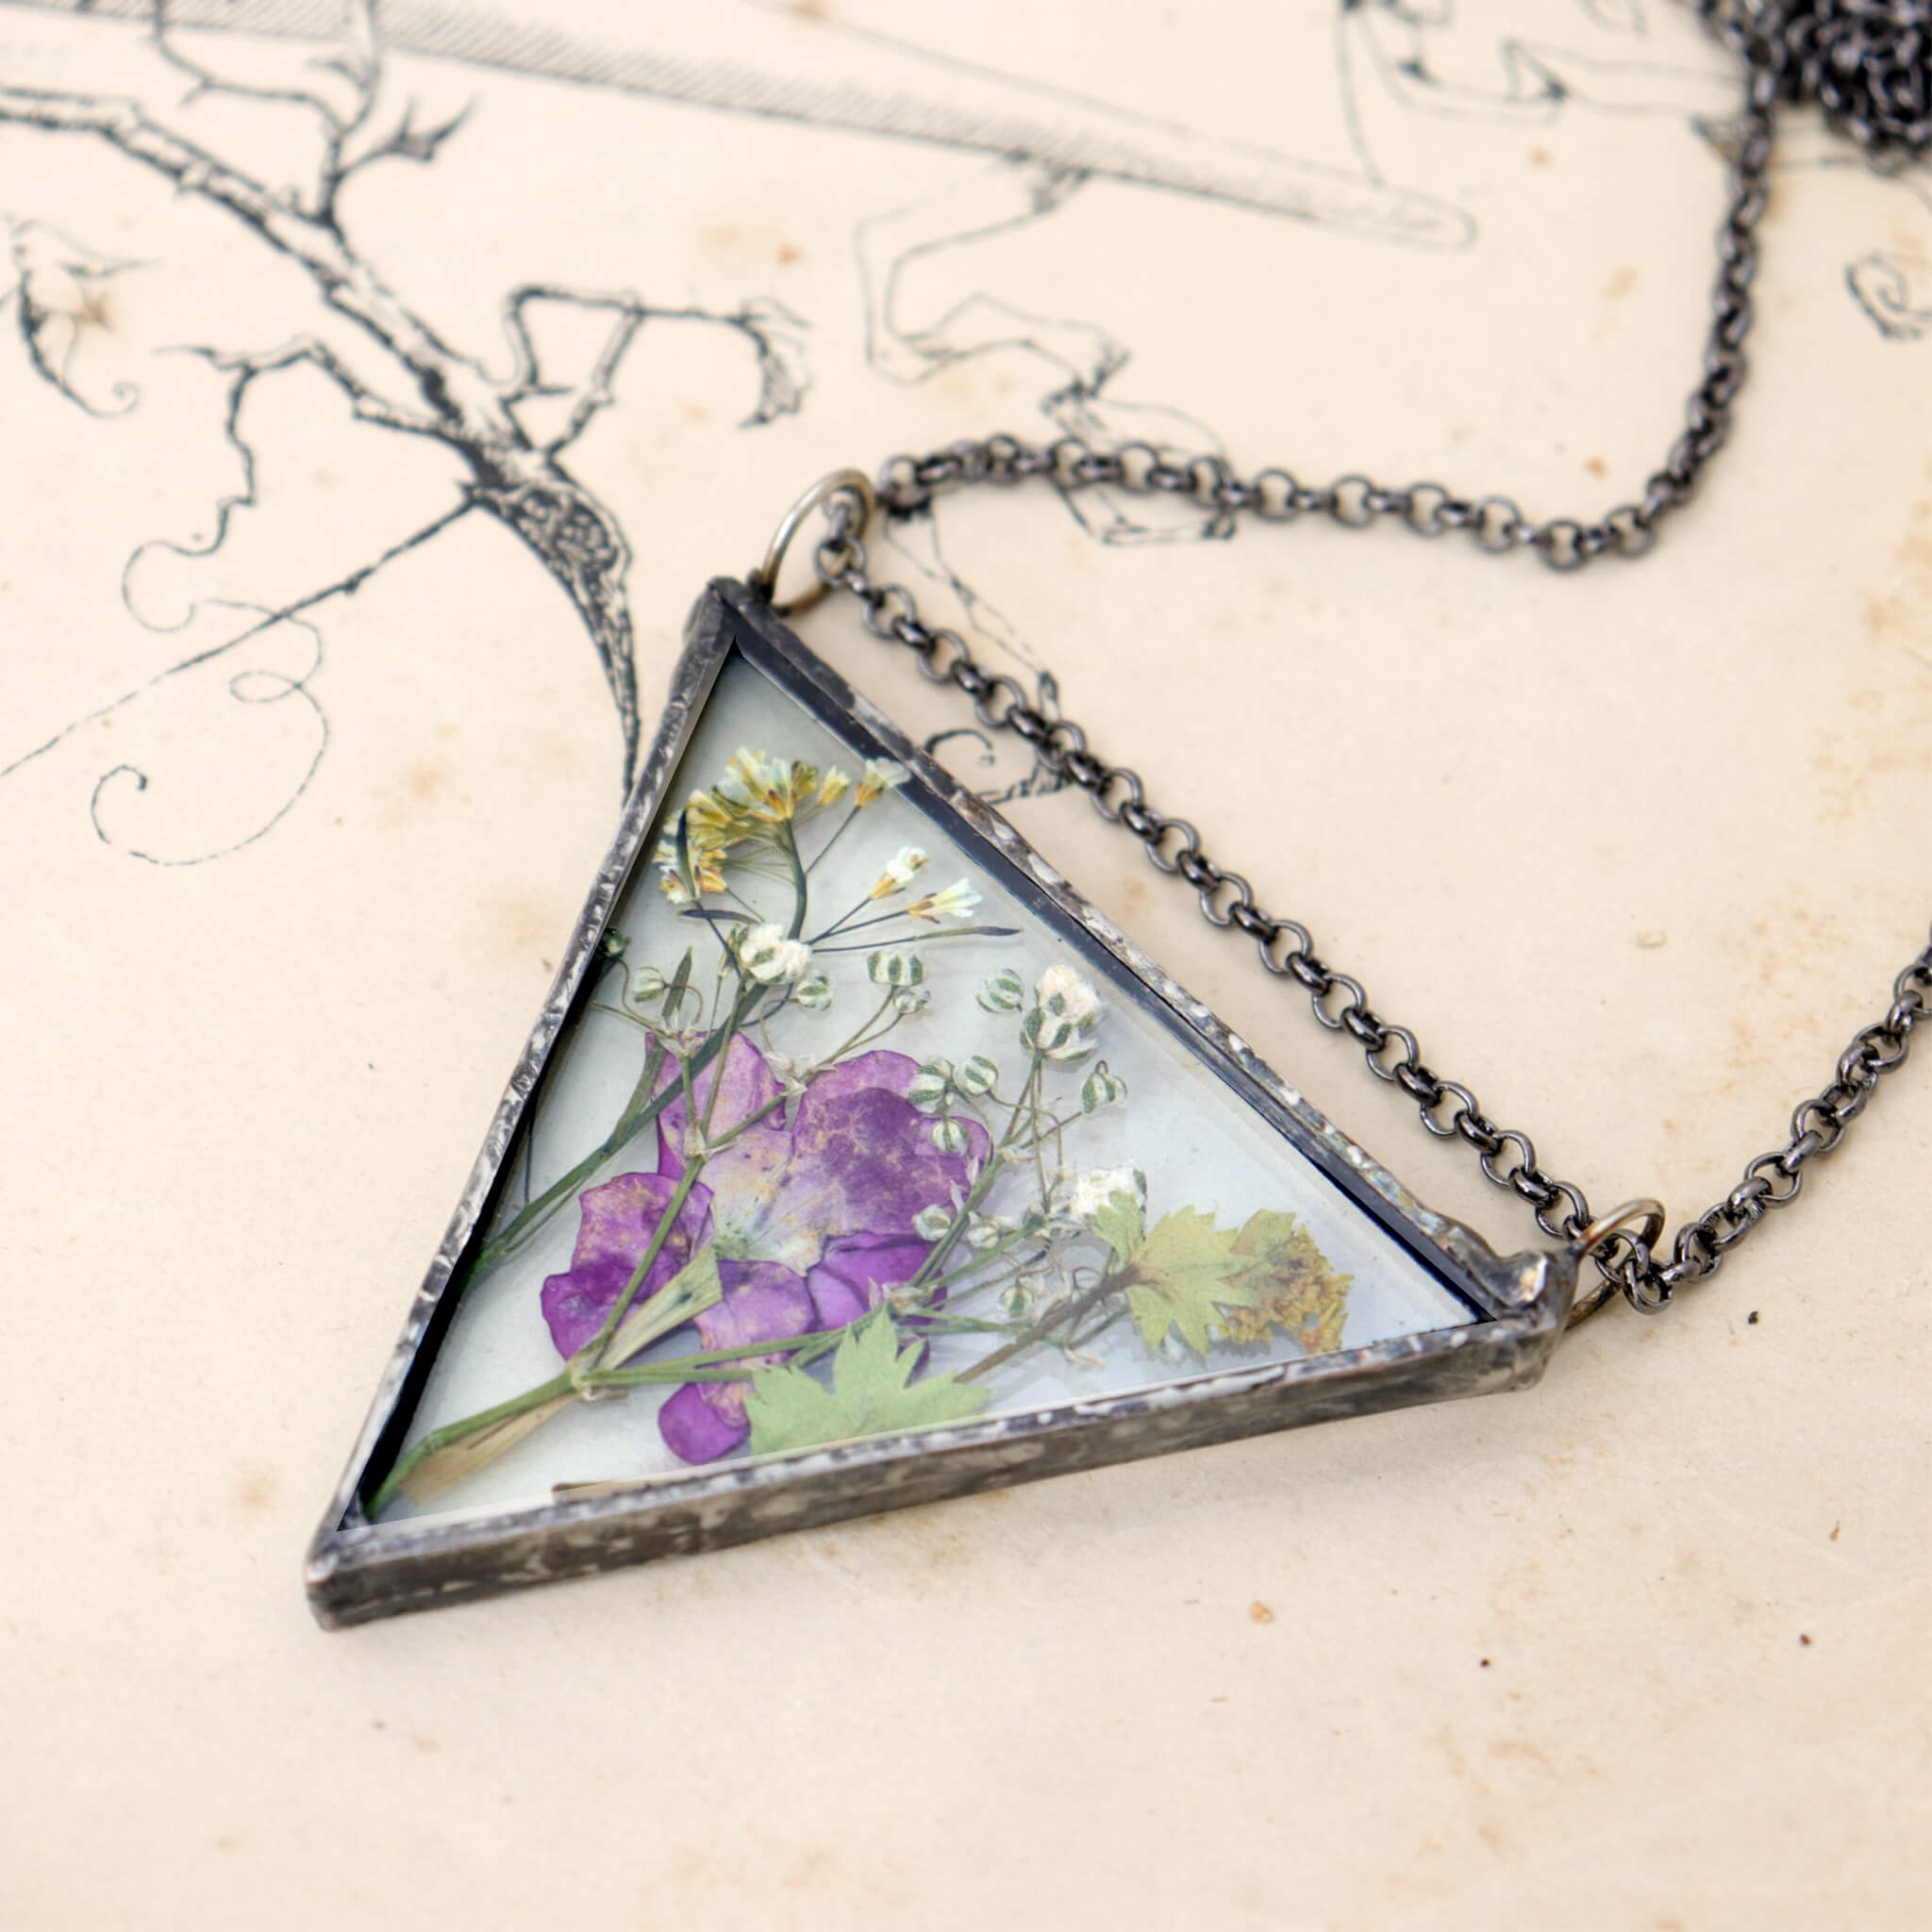 Triangular pressed pink flower necklace lying on an old book